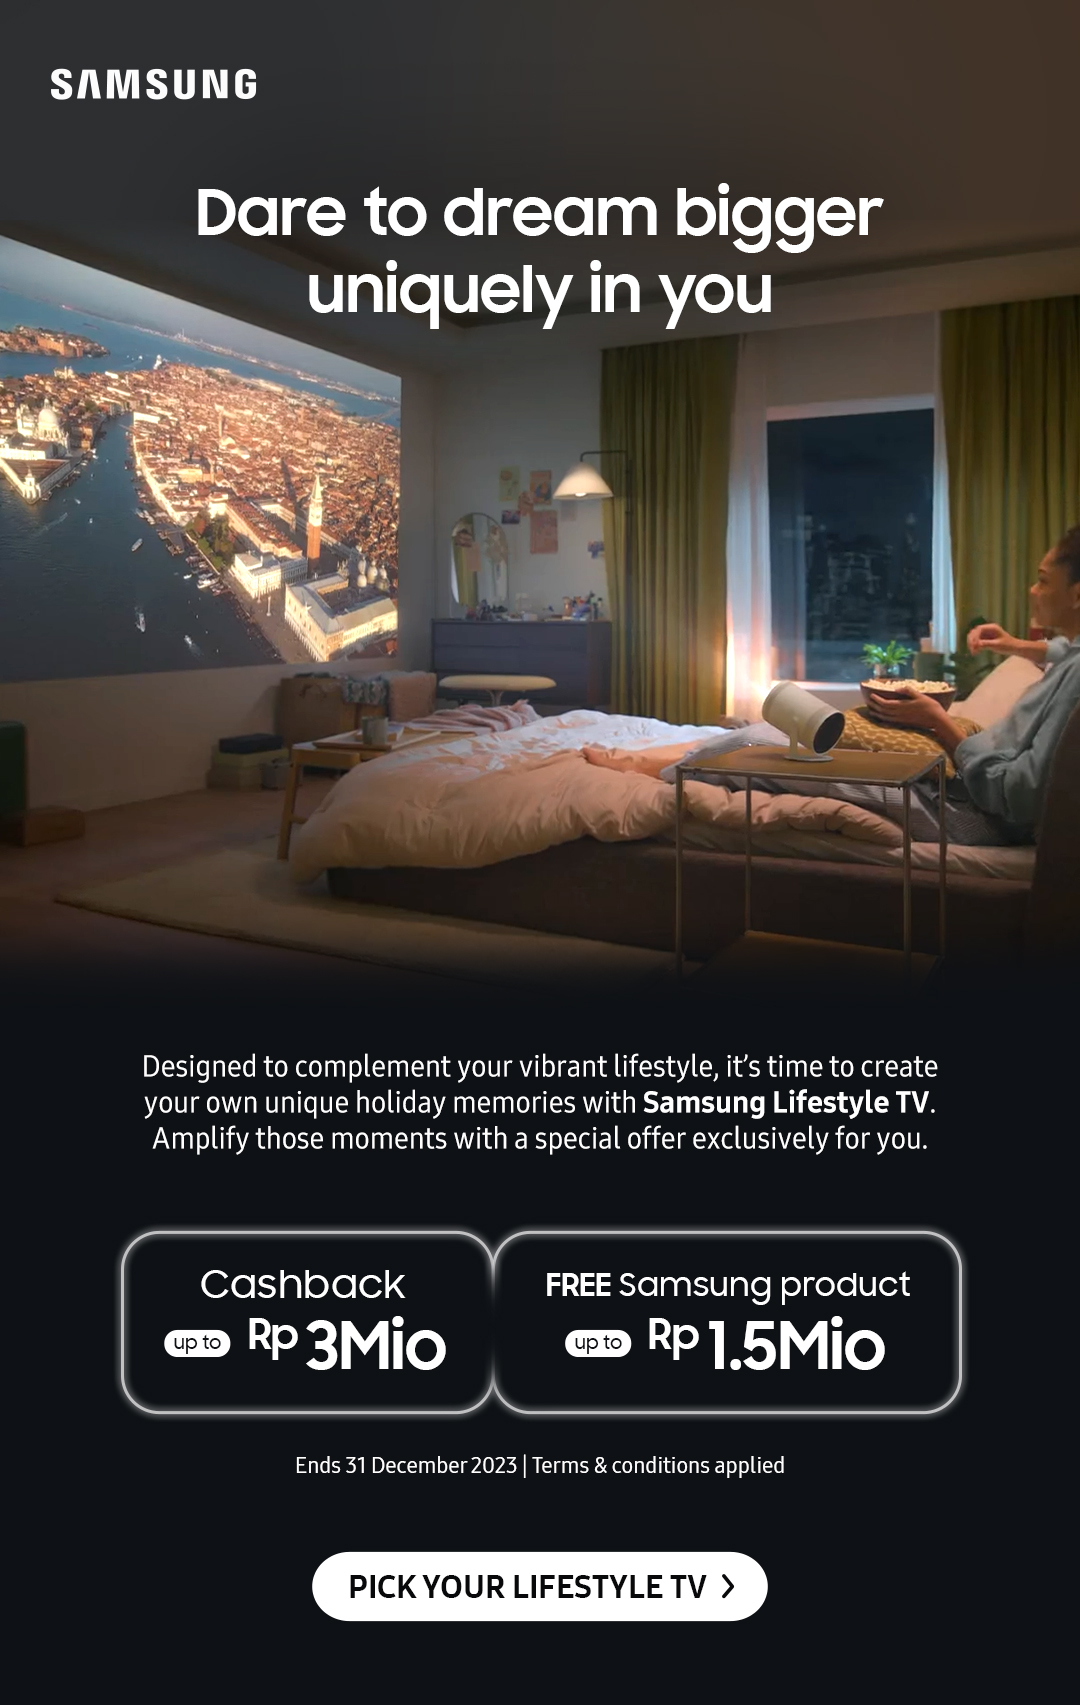 Dare to dream bigger uniquely in you | Designed to complement your vibrant lifestyle, it's time to create your own unique holiday memories with Samsung Lifestyle TV. Amplify those moments with a special offer exclusively for you.